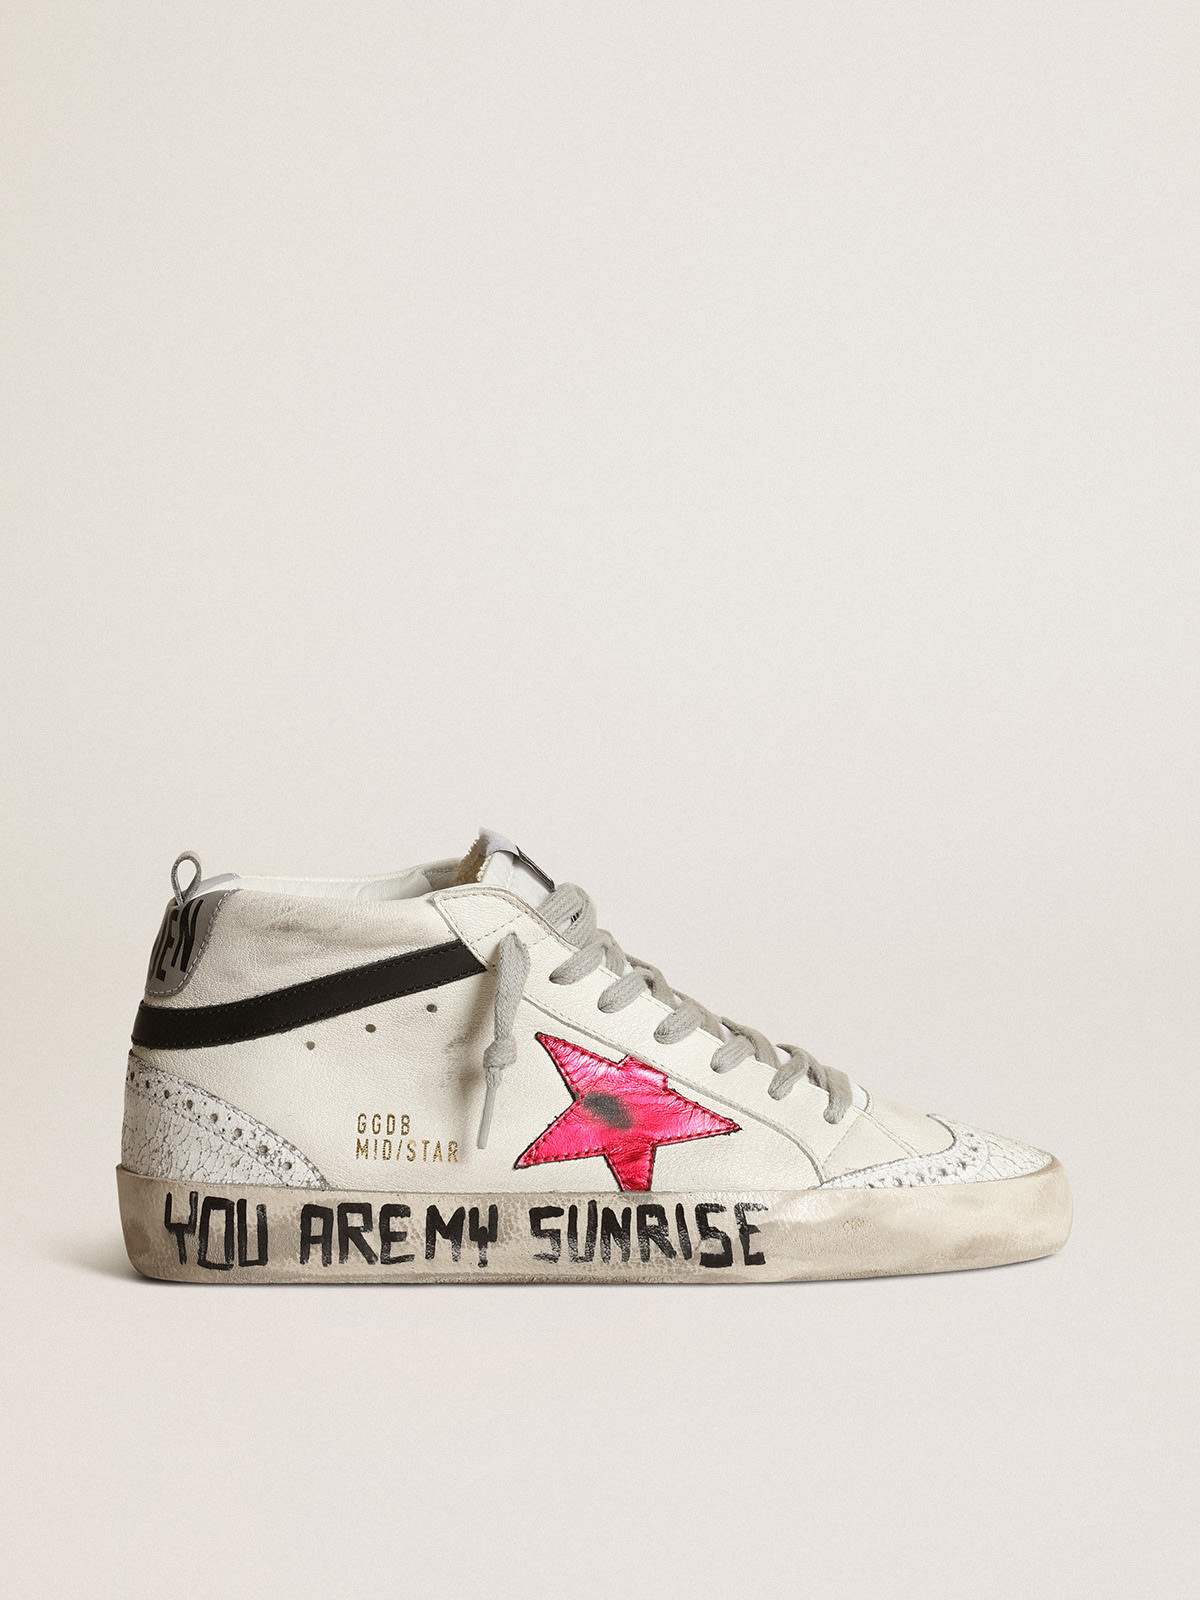 Golden Goose Sneakers Uomo Mid Star with a pink laminated leather star and black flash